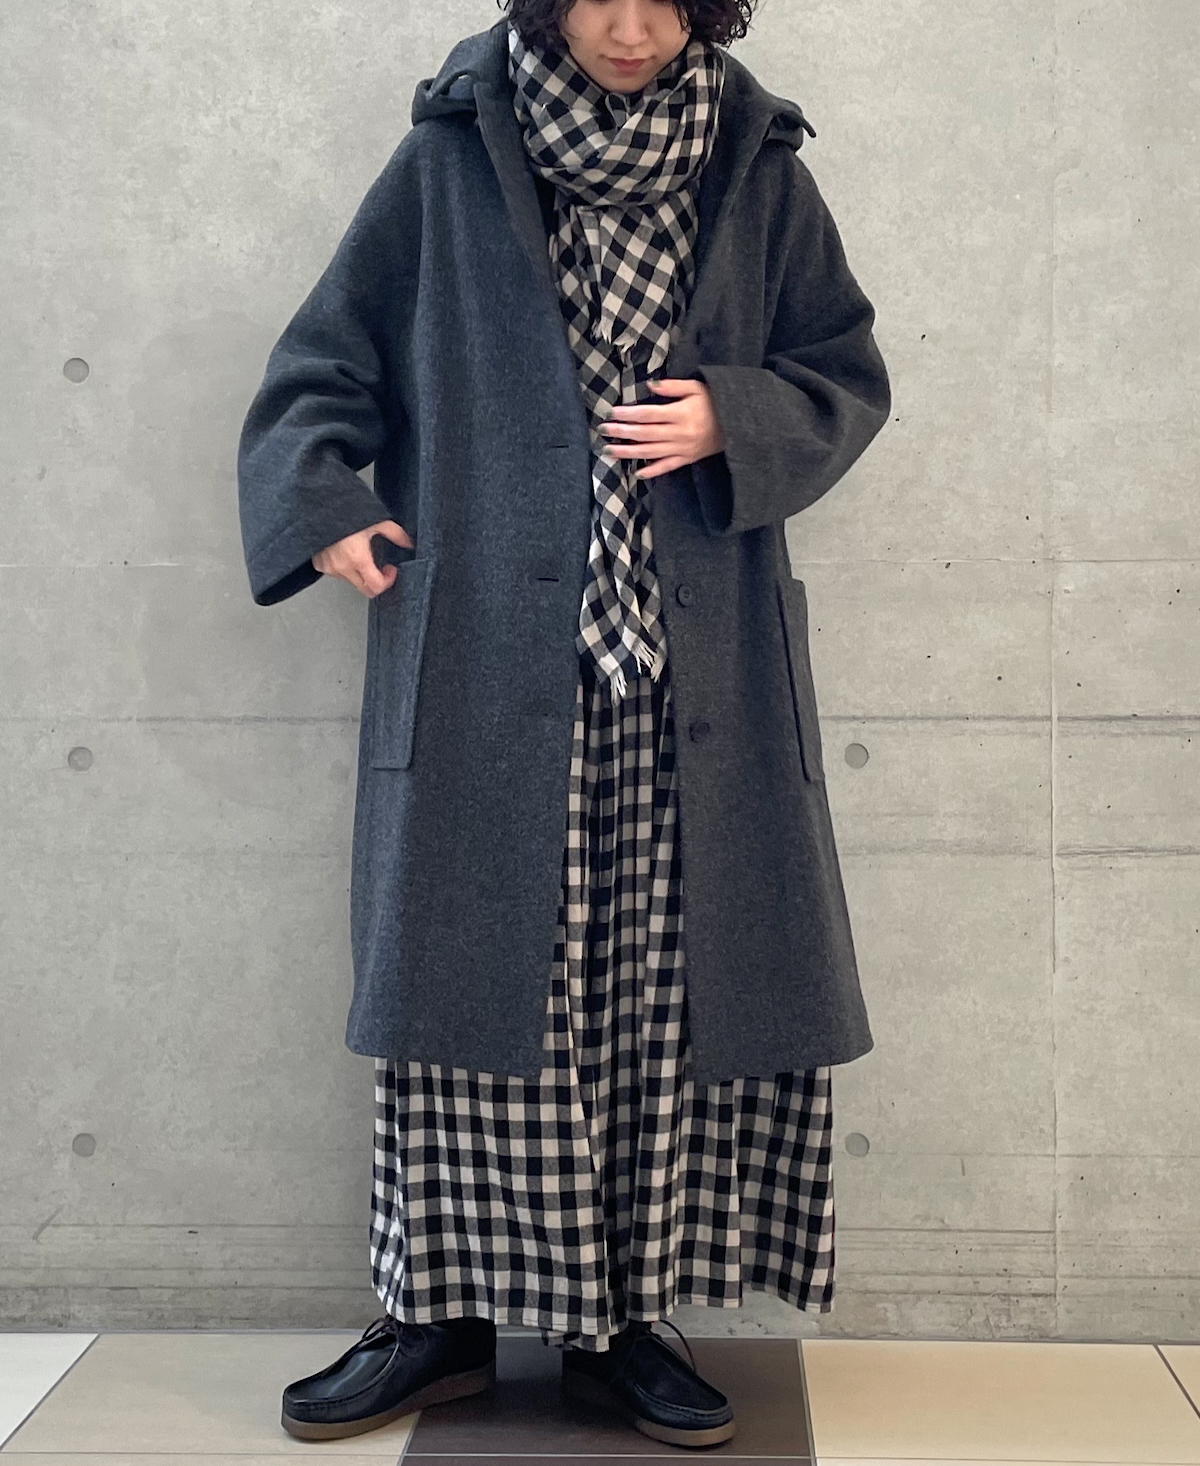 NMDS23595 (キュロット) BOILED WOOL BIG GINGHAM CHECK GATHERED CULOTTES